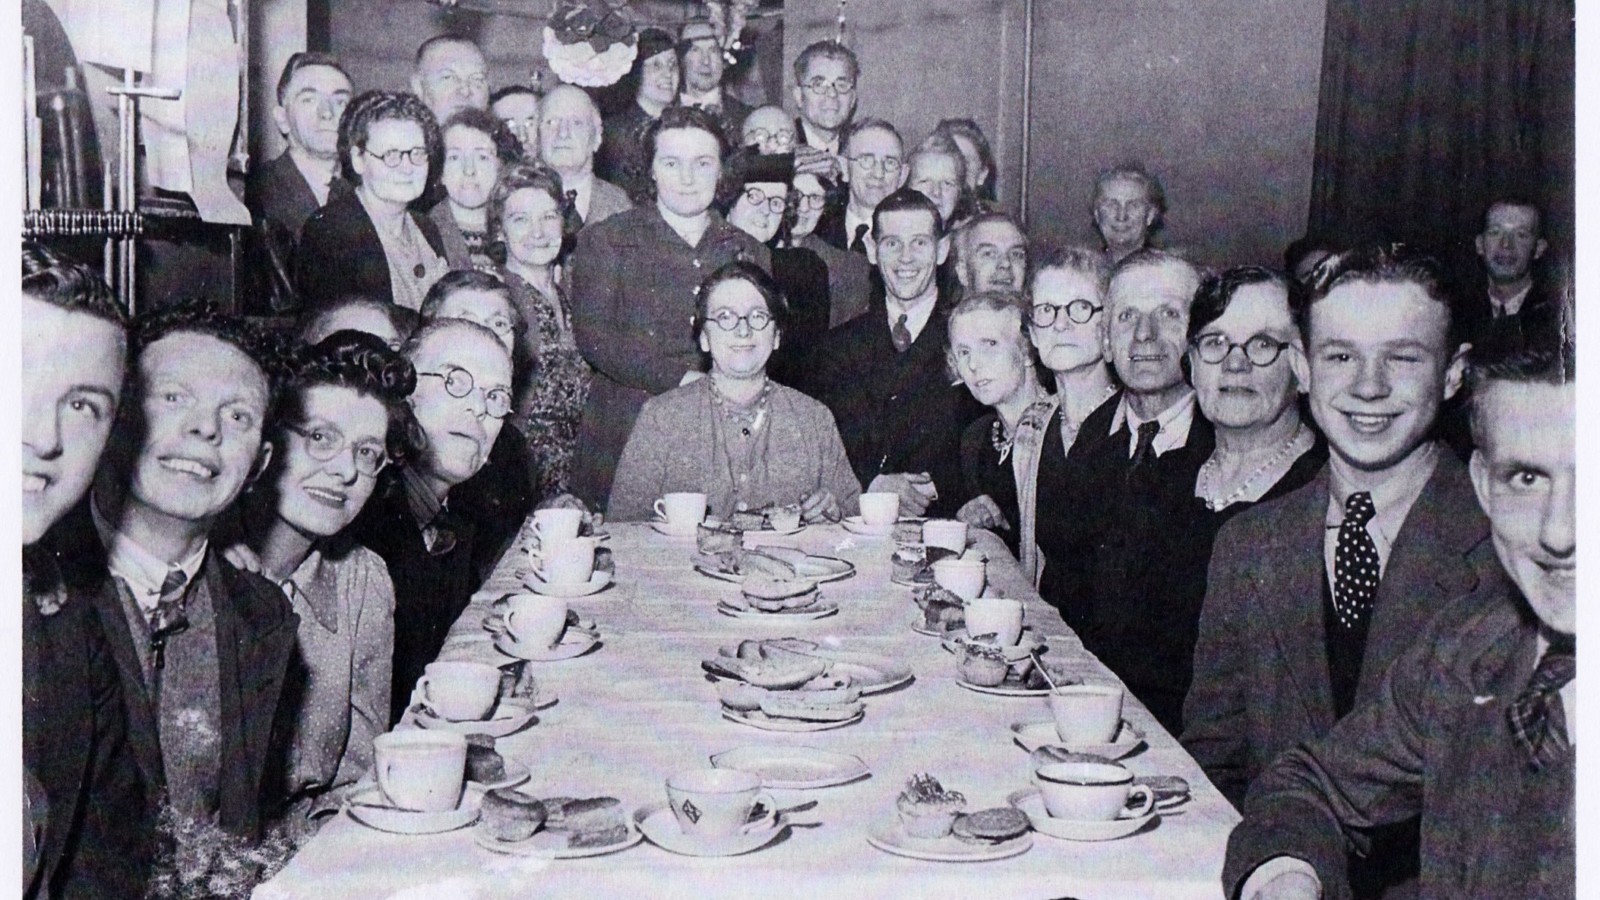 A black and white photograph of a large number of people sitting and standing around a table, posing for a photograph. The table is set with teacups and saucers.